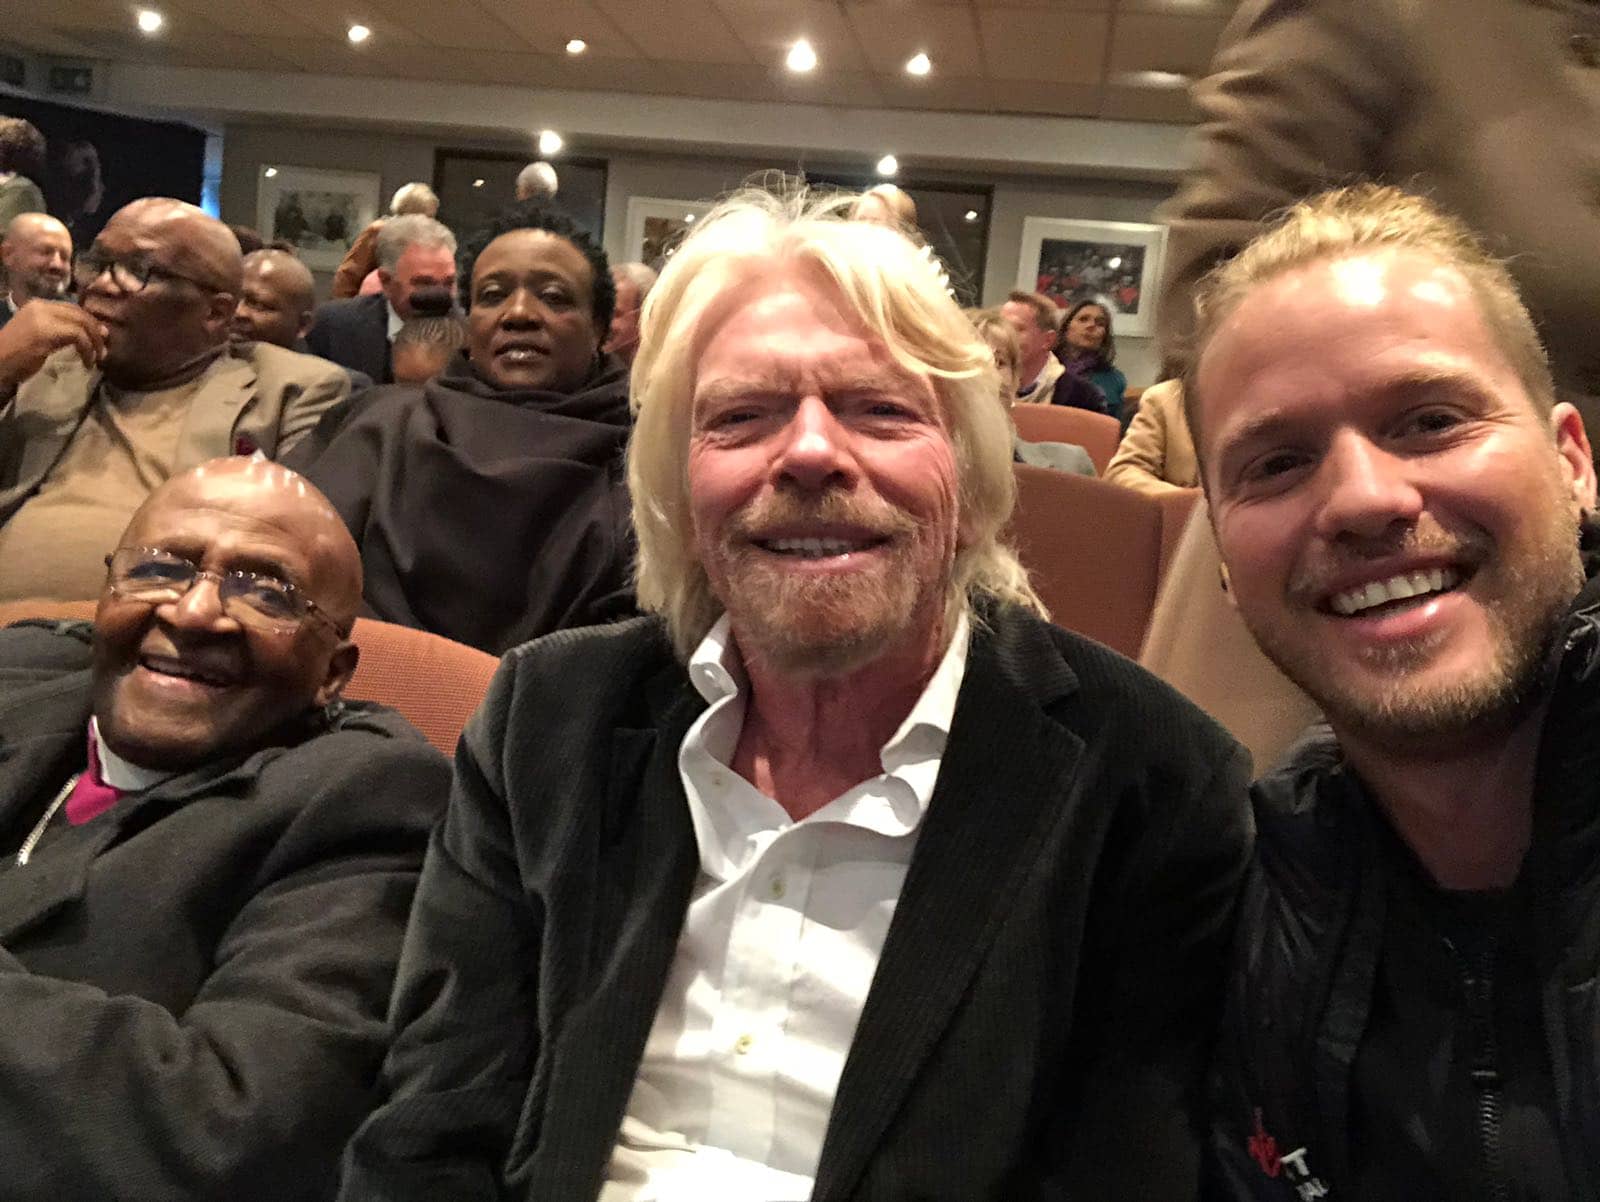 Richard and Sam Branson sitting next to Archbishop Desmond Tutu in a hall with other people in the background 